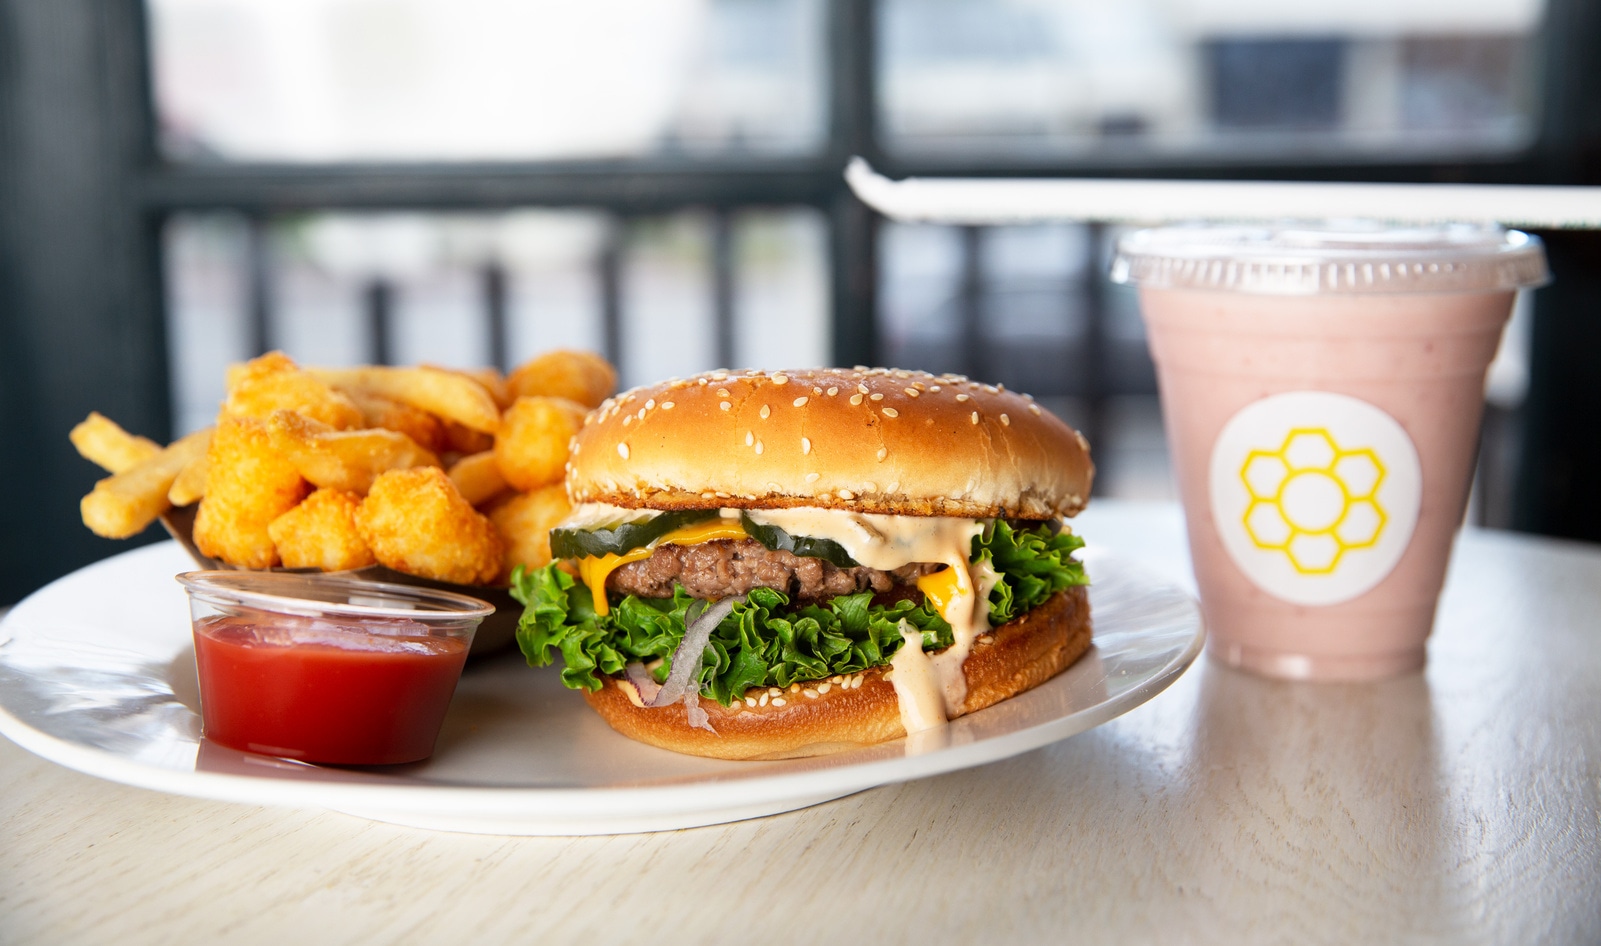 Could This Vegan Chain Become the Next Shake Shack? It Just Raised $1 Million in Six Weeks to Do It